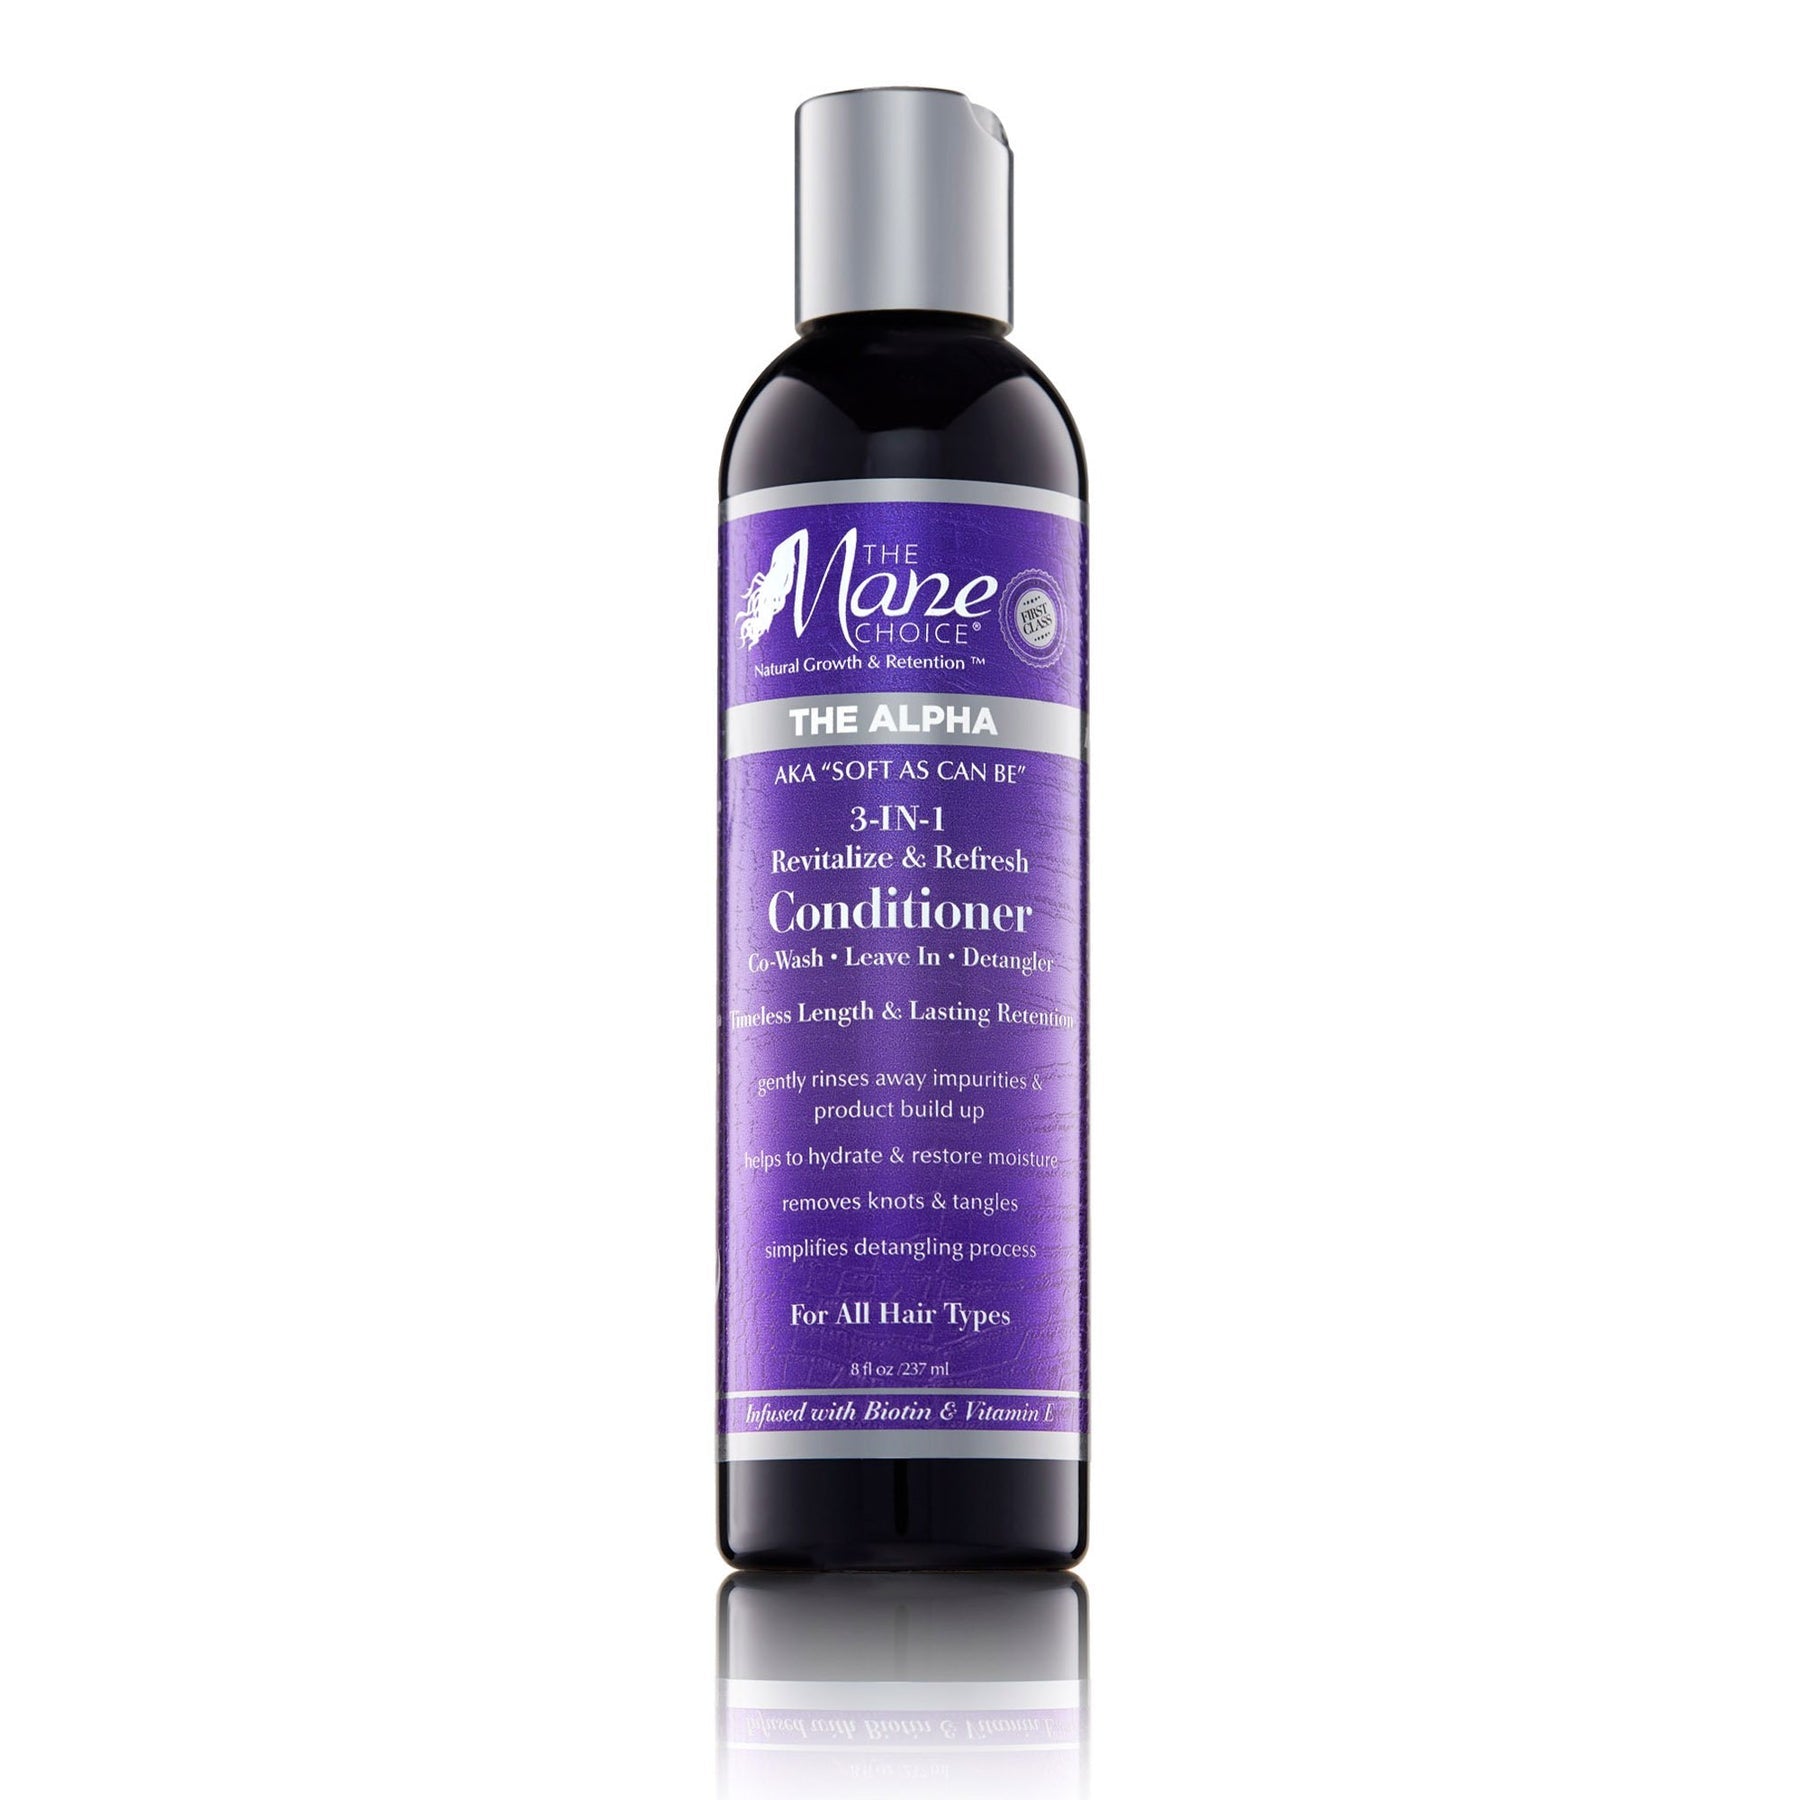 The Mane Choice The Alpha Soft As Can Be 3-in-1 Revitalize & Refresh Conditioner 8 oz